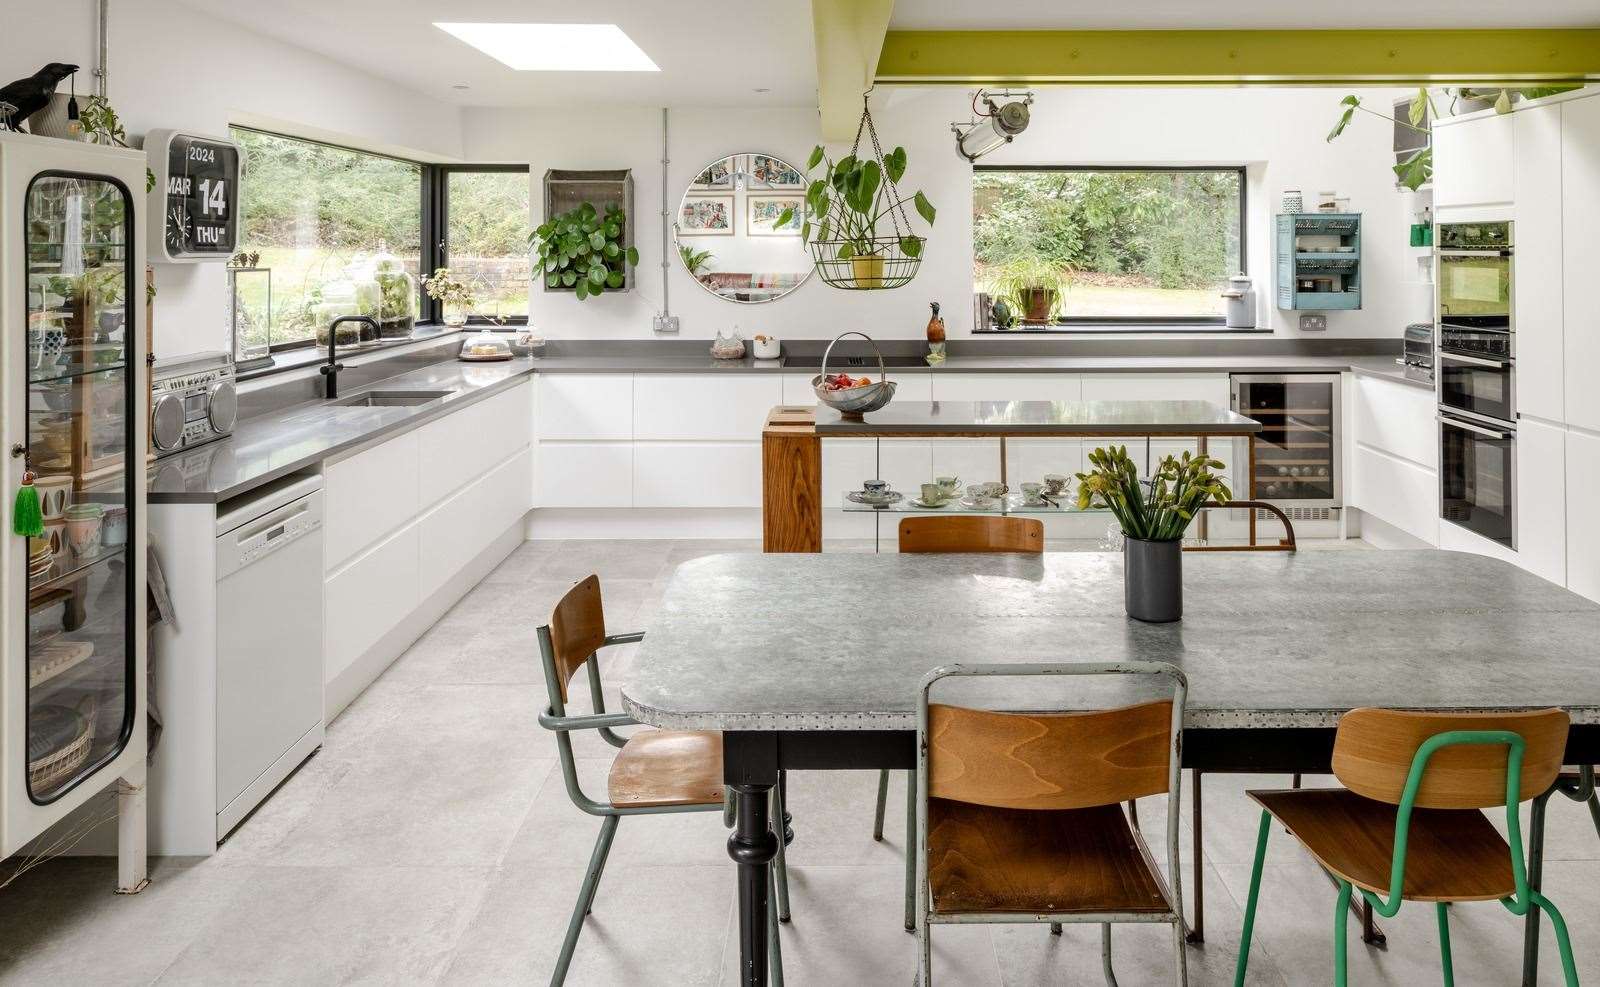 The kitchen is part of the modern property, which was built in 1980. Picture: The Modern House